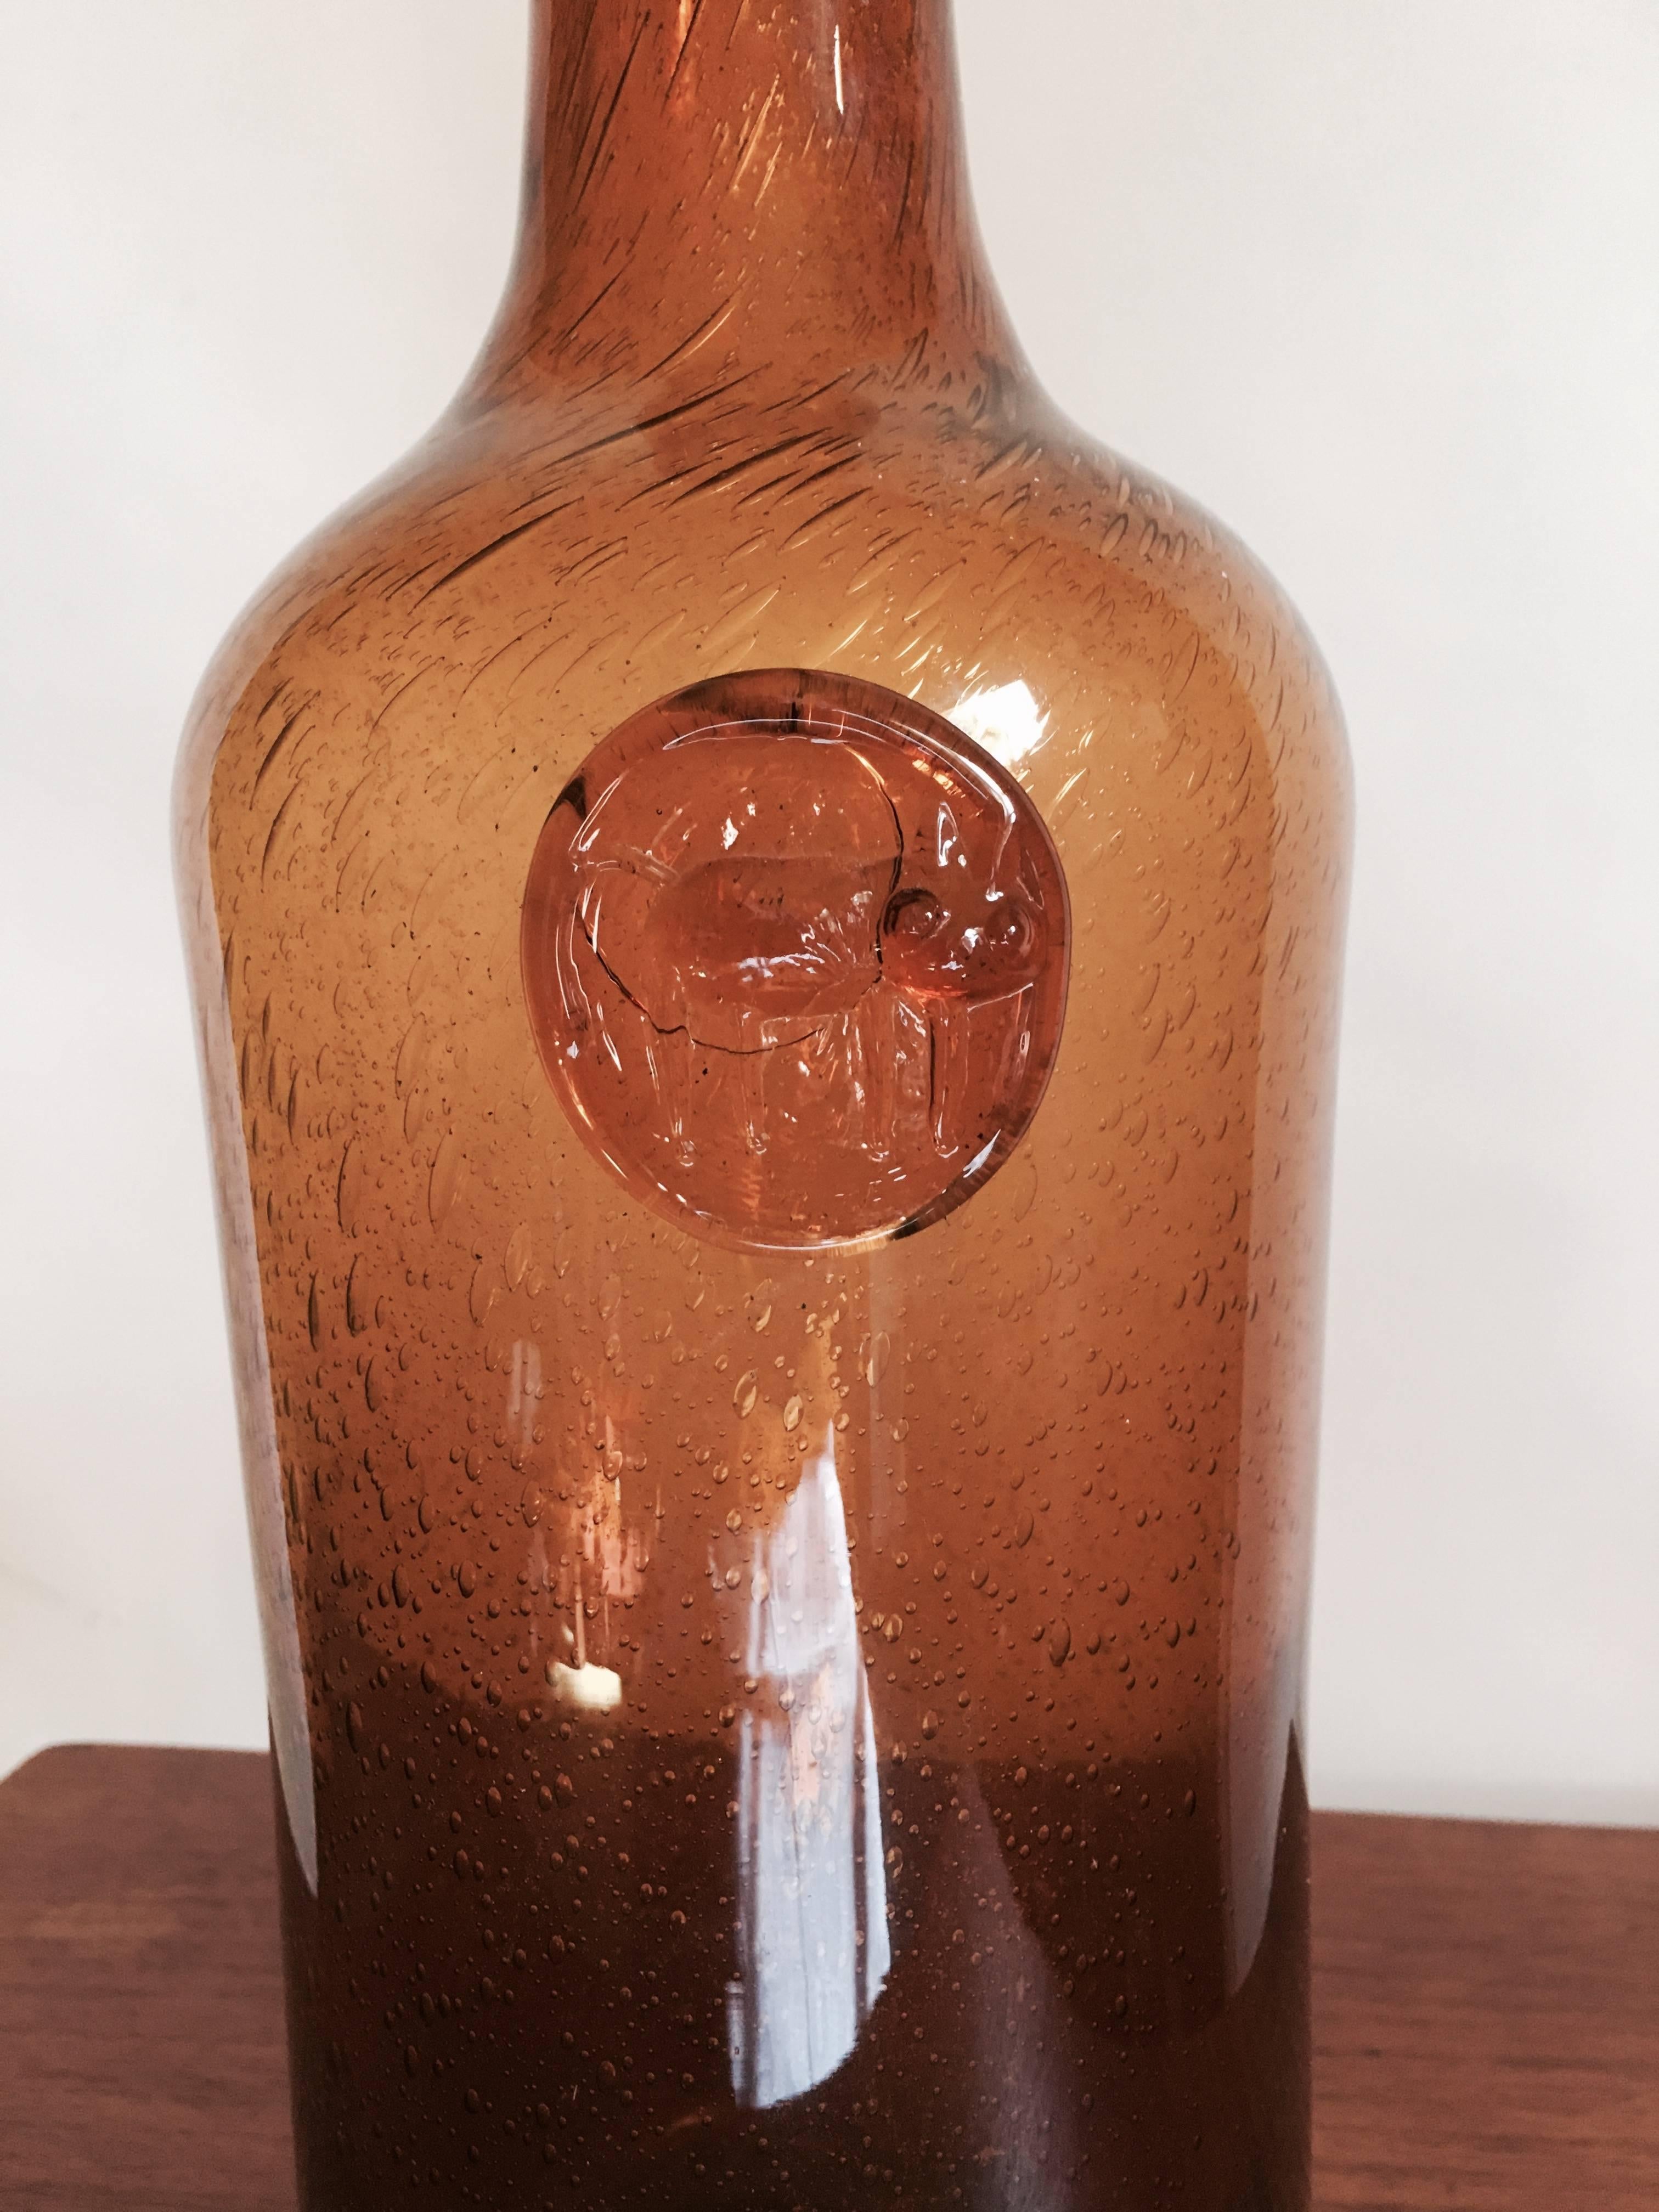 Erik Hoglund amber glass bottle with cat print. Signature bubbles in glass. Handblown vessel with stamped prunt, Swedish, circa 1960. Hand-etched mark on base. Exceptional scale.